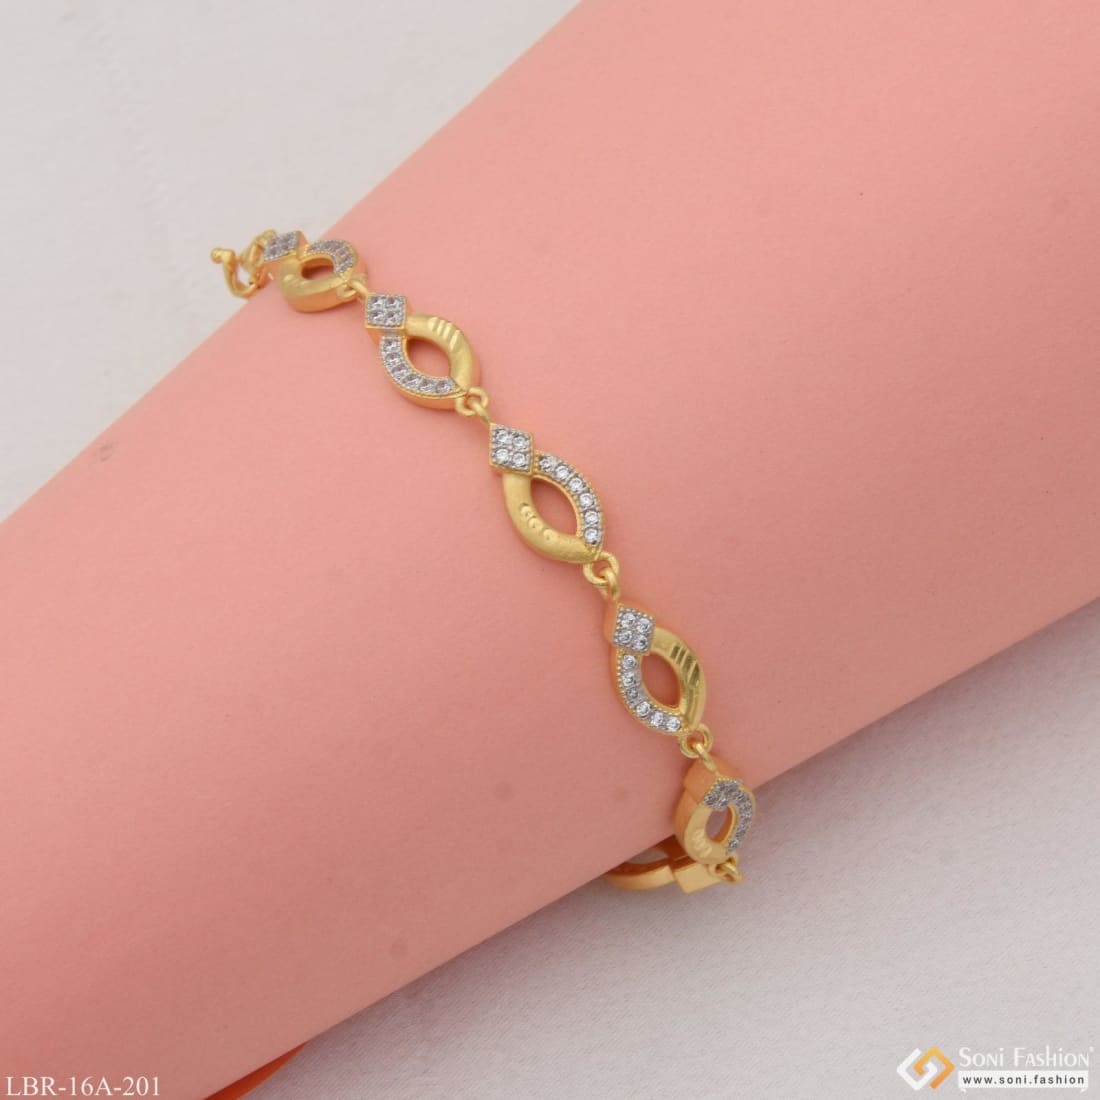 Love 24k Heart Gold Copper Pakistani Gold Bangles Bracelet Perfect Wedding  Gift For Women And Girls In Dubai, Africa, Saudi Arabia, And Arabic Styles  From Trumanessa, $19.48 | DHgate.Com